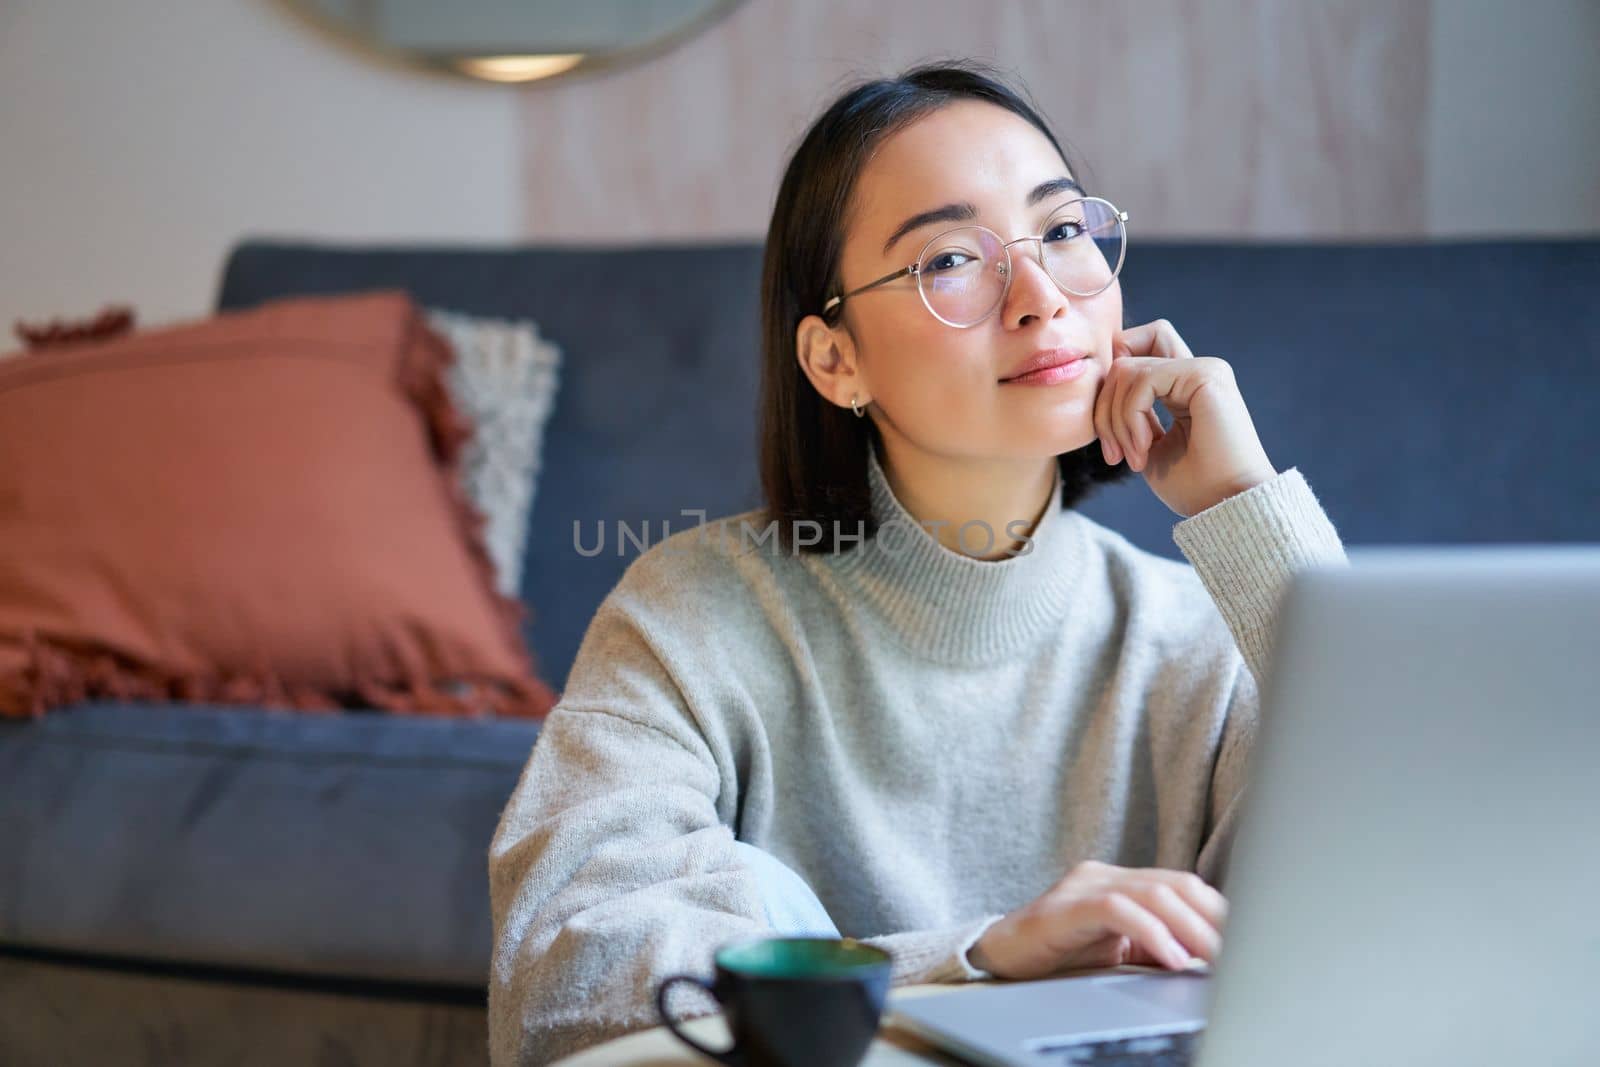 Self-employed young smiling woman, freelancer staying at home, working on remote from laptop, wearing glasses, sitting in living room.